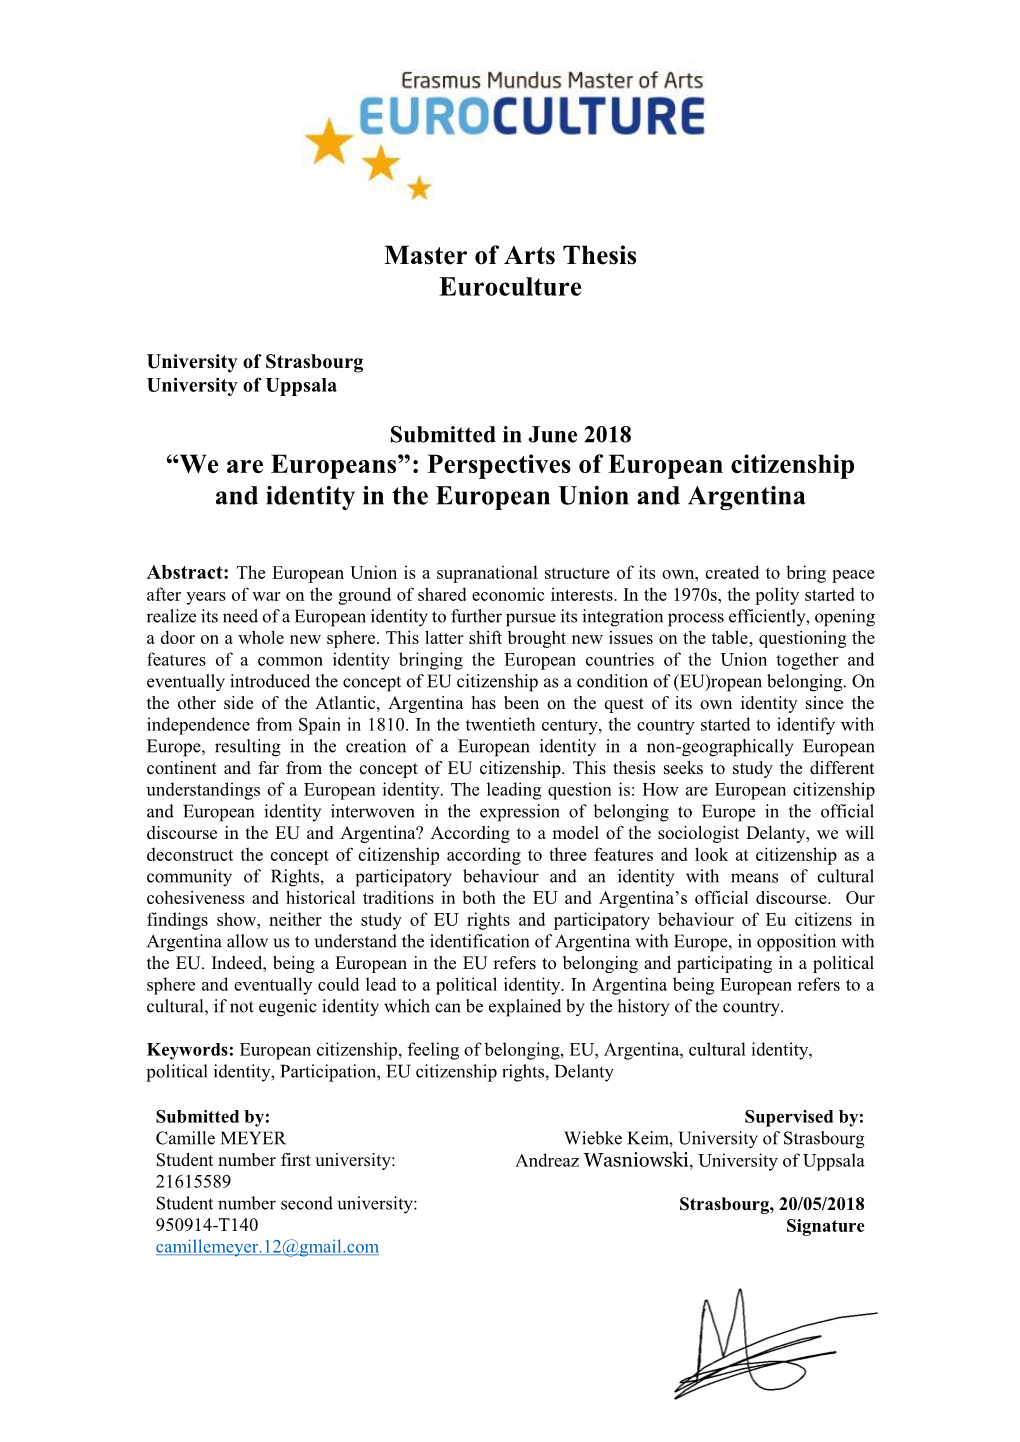 Master of Arts Thesis Euroculture “We Are Europeans”